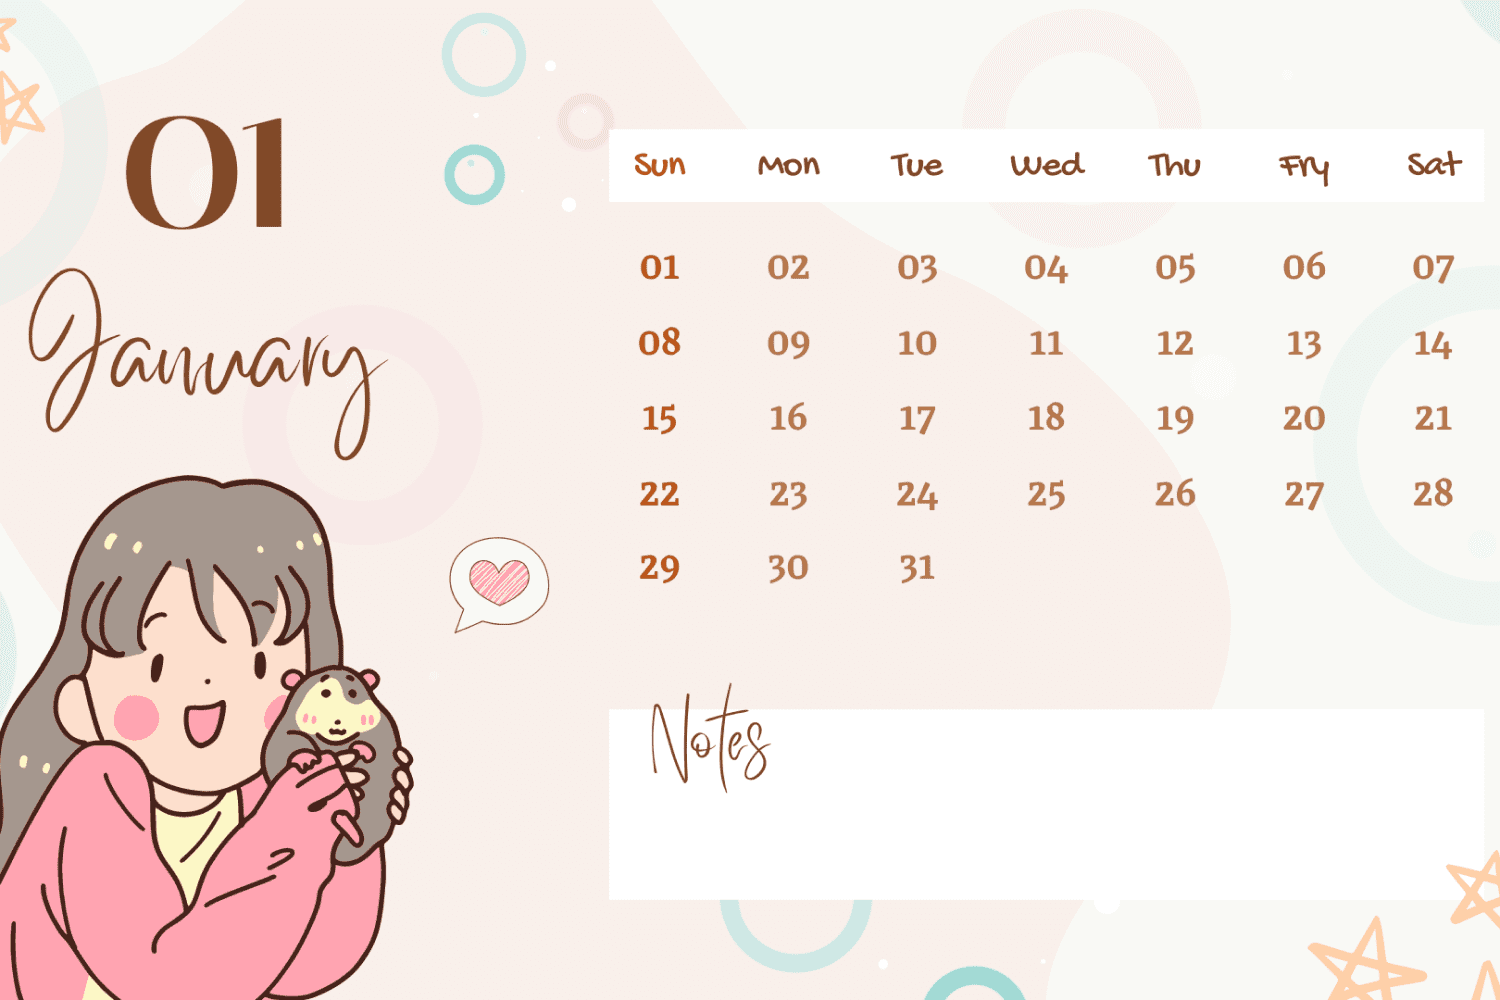 Calendar for January with a drawn girl with an animal in her hands.